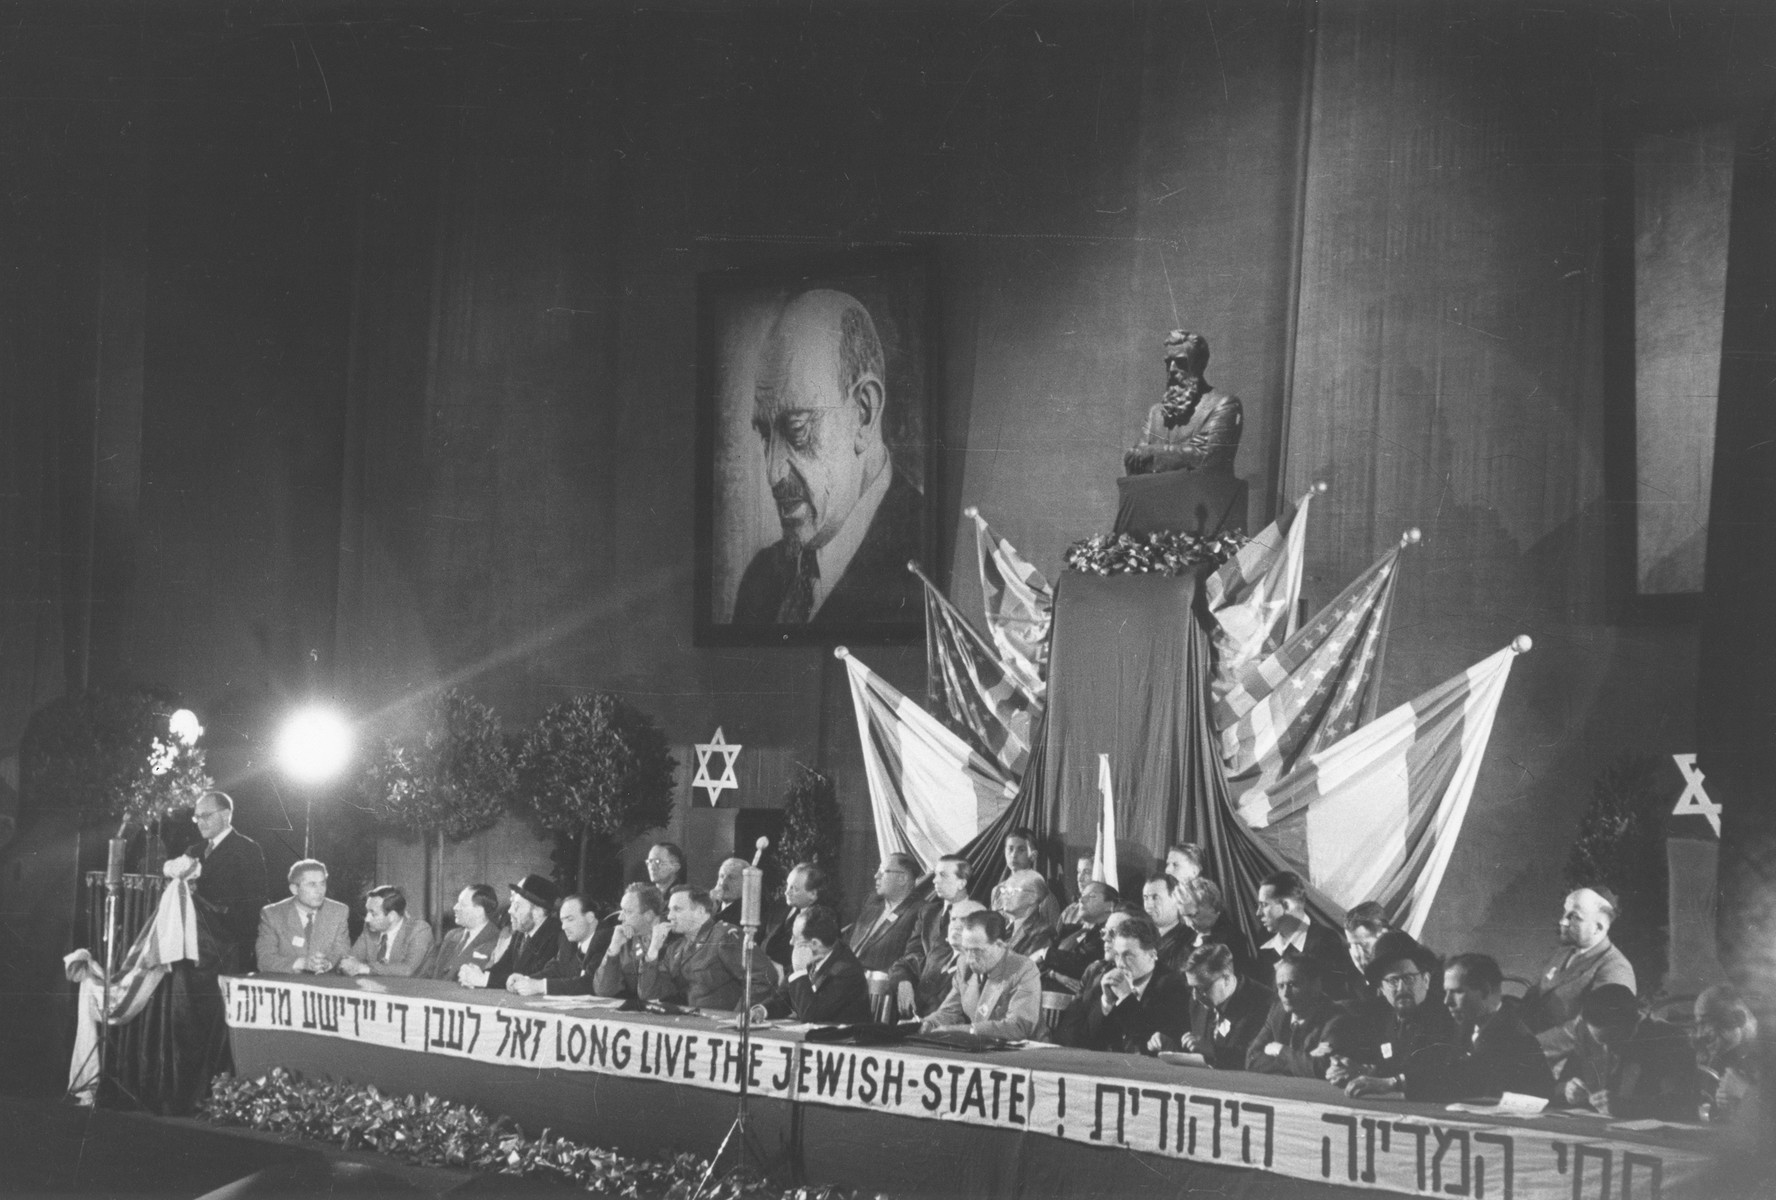 An official of the Jewish government in Palestine delivers an address to the Third Congress of the Central Committee of the Liberated Jews in the US Zone of Germany at Bad Reichenhall.